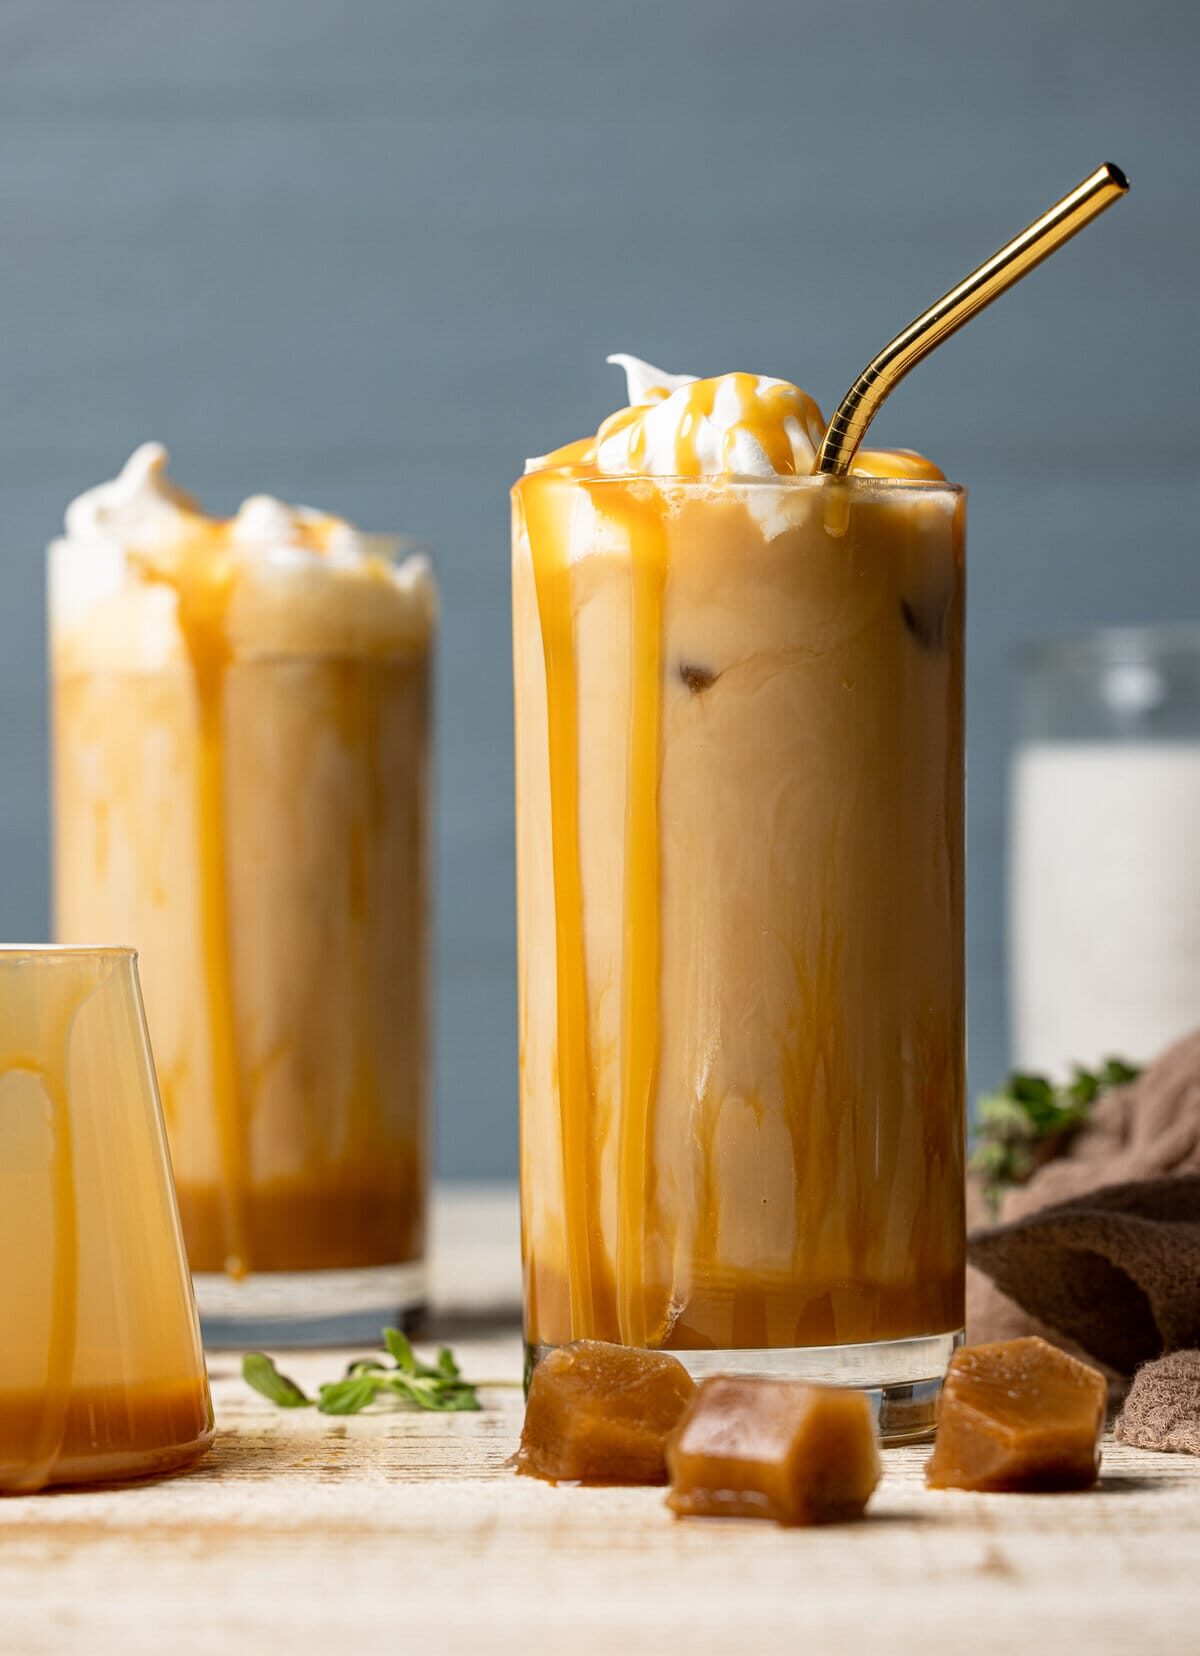 Nature's Gift, Organic Iced Coffee Blend